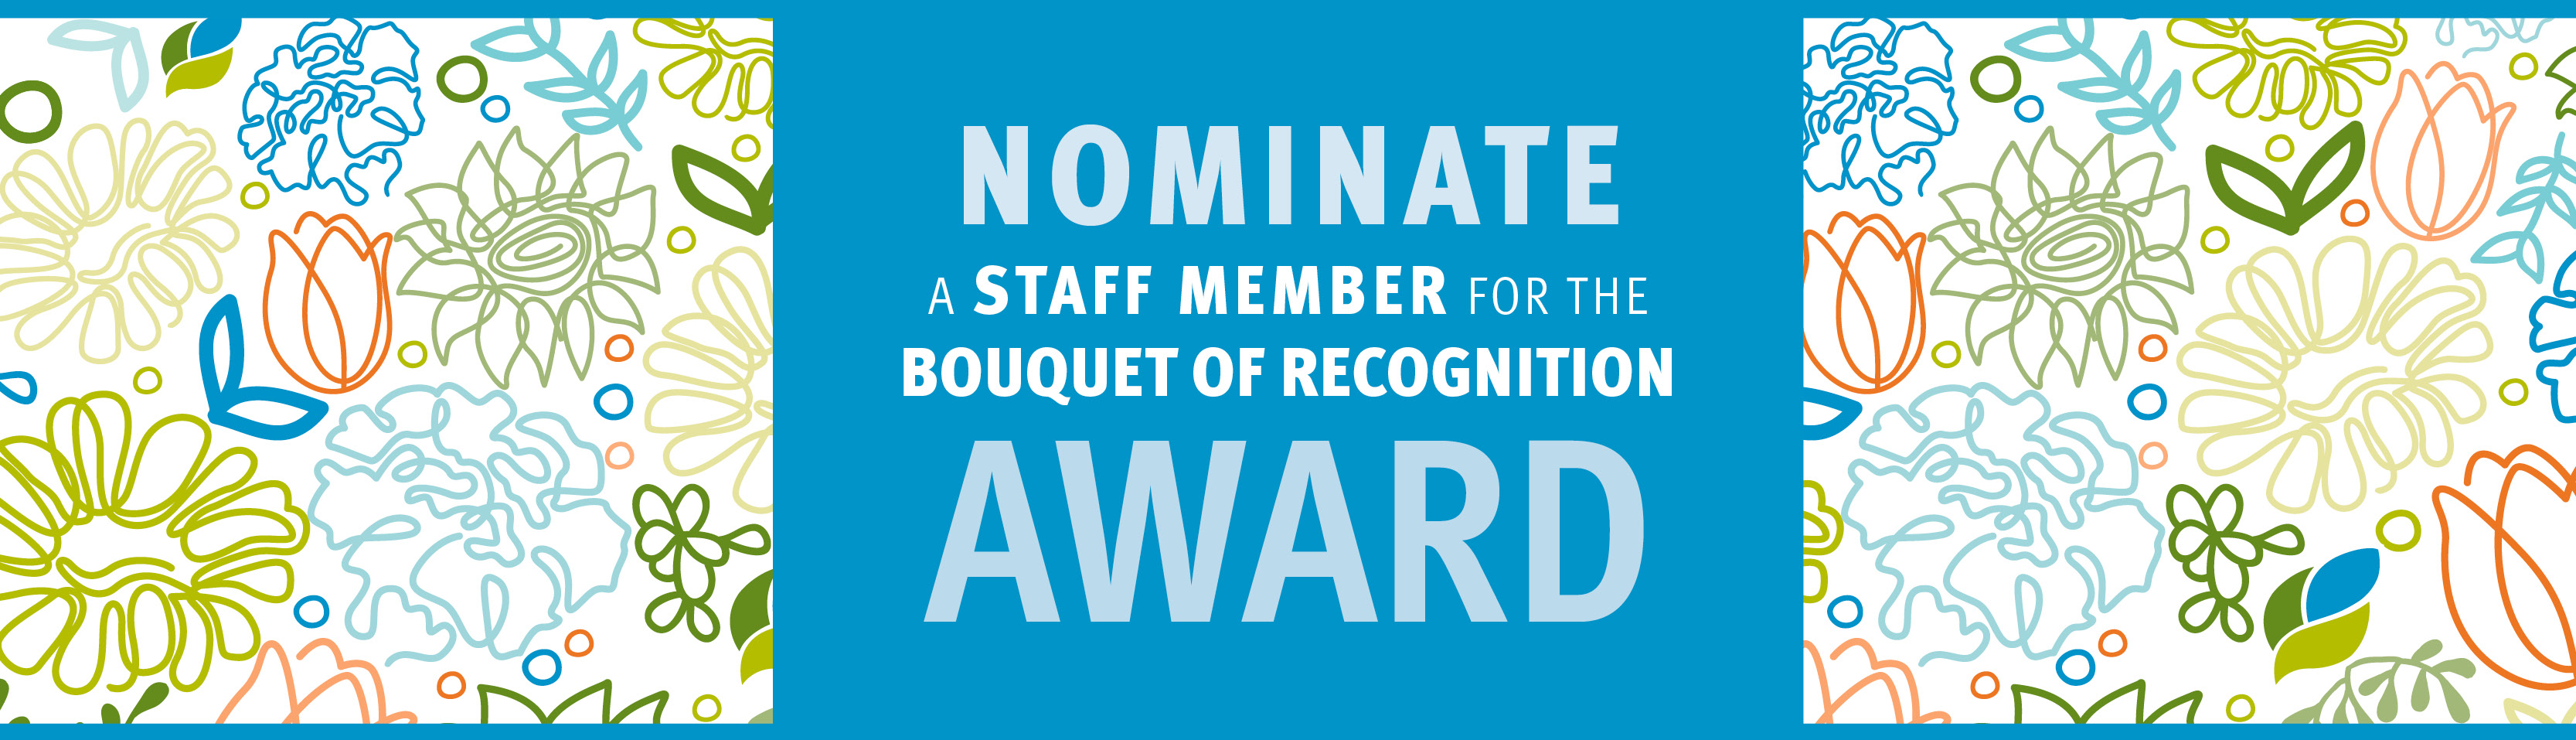 Nominate a staff member for the Bouquet of Recognition award